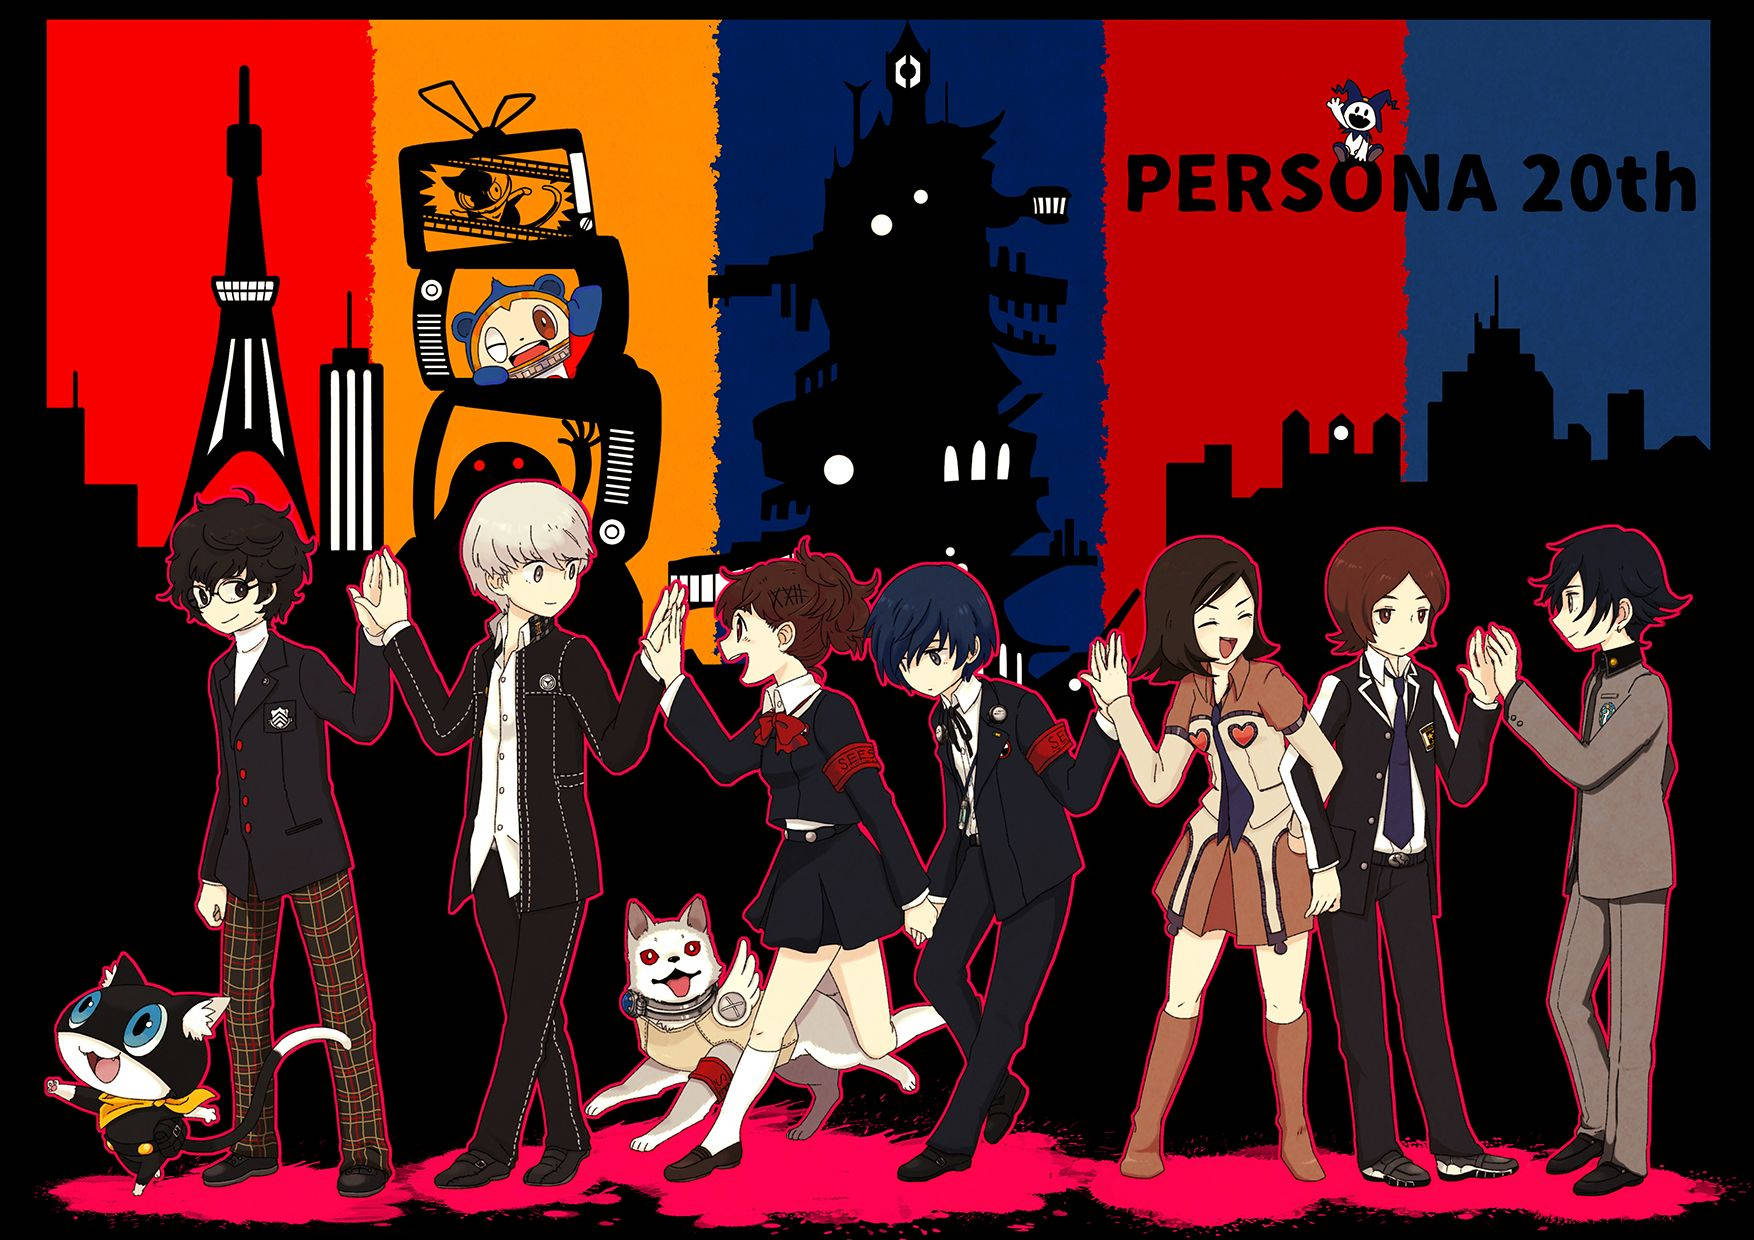 Immerse yourself in the world of Persona with your favourite characters! Wallpaper